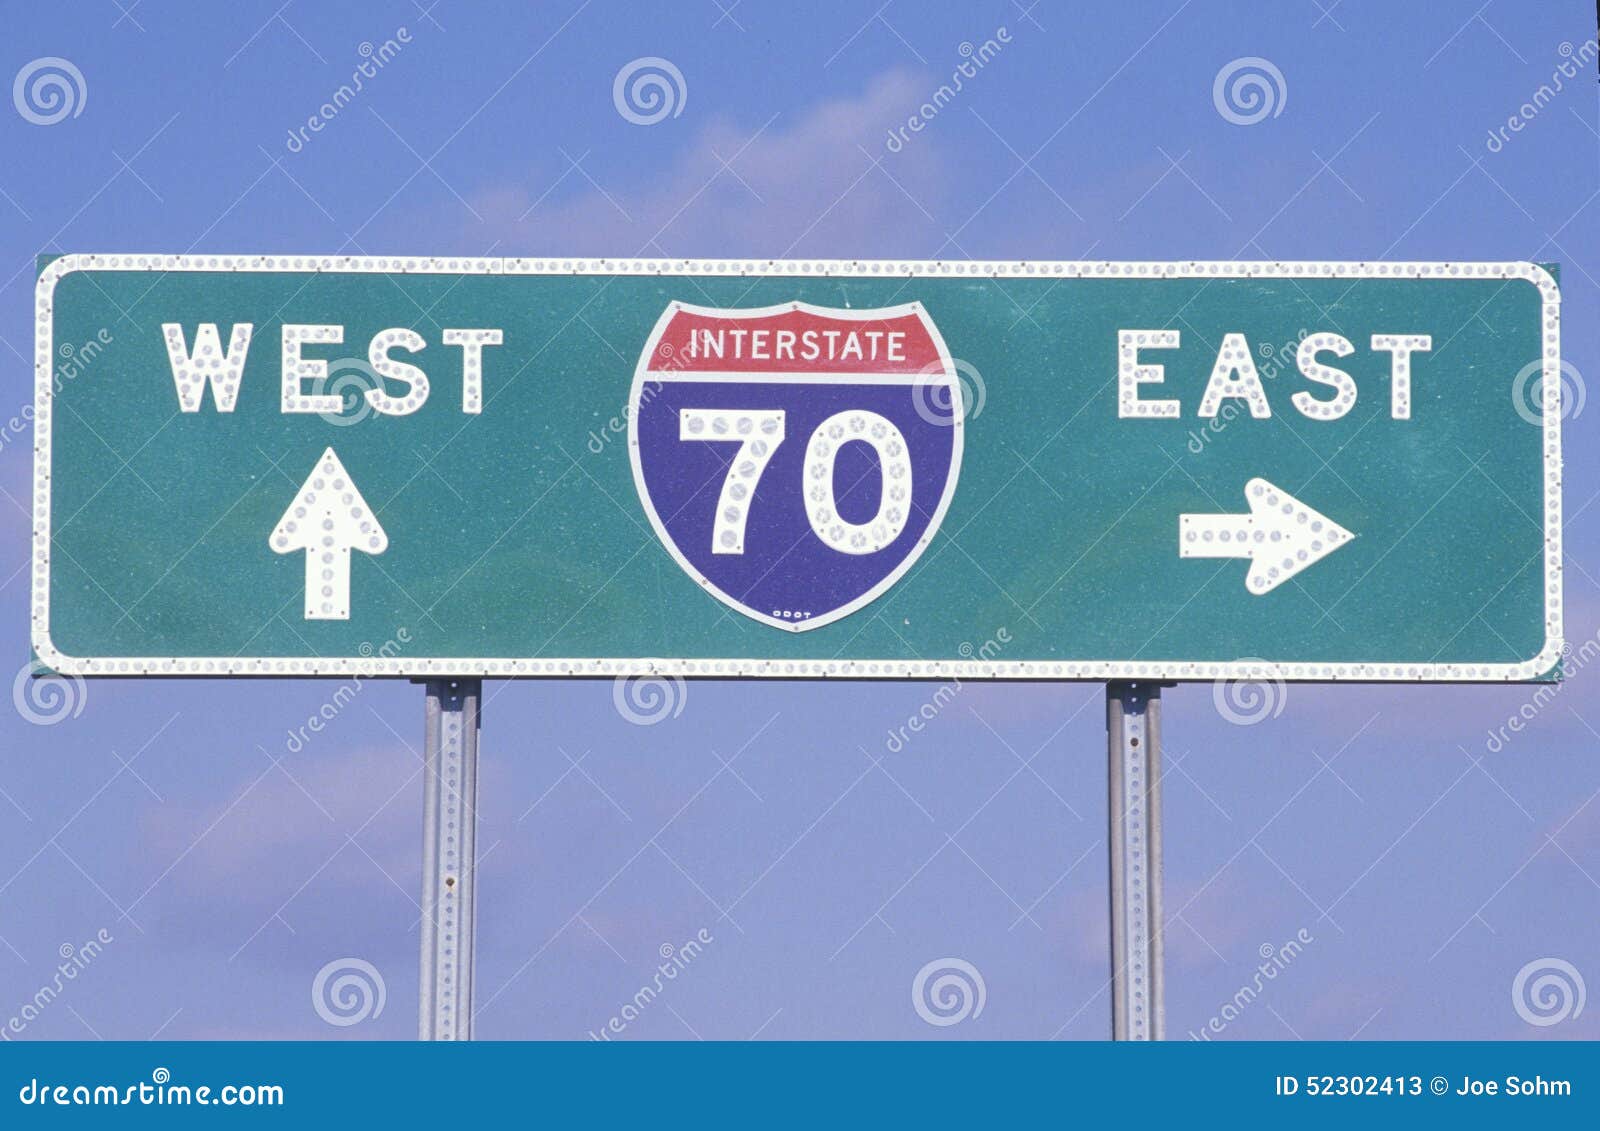 a sign for interstate 70 west and east